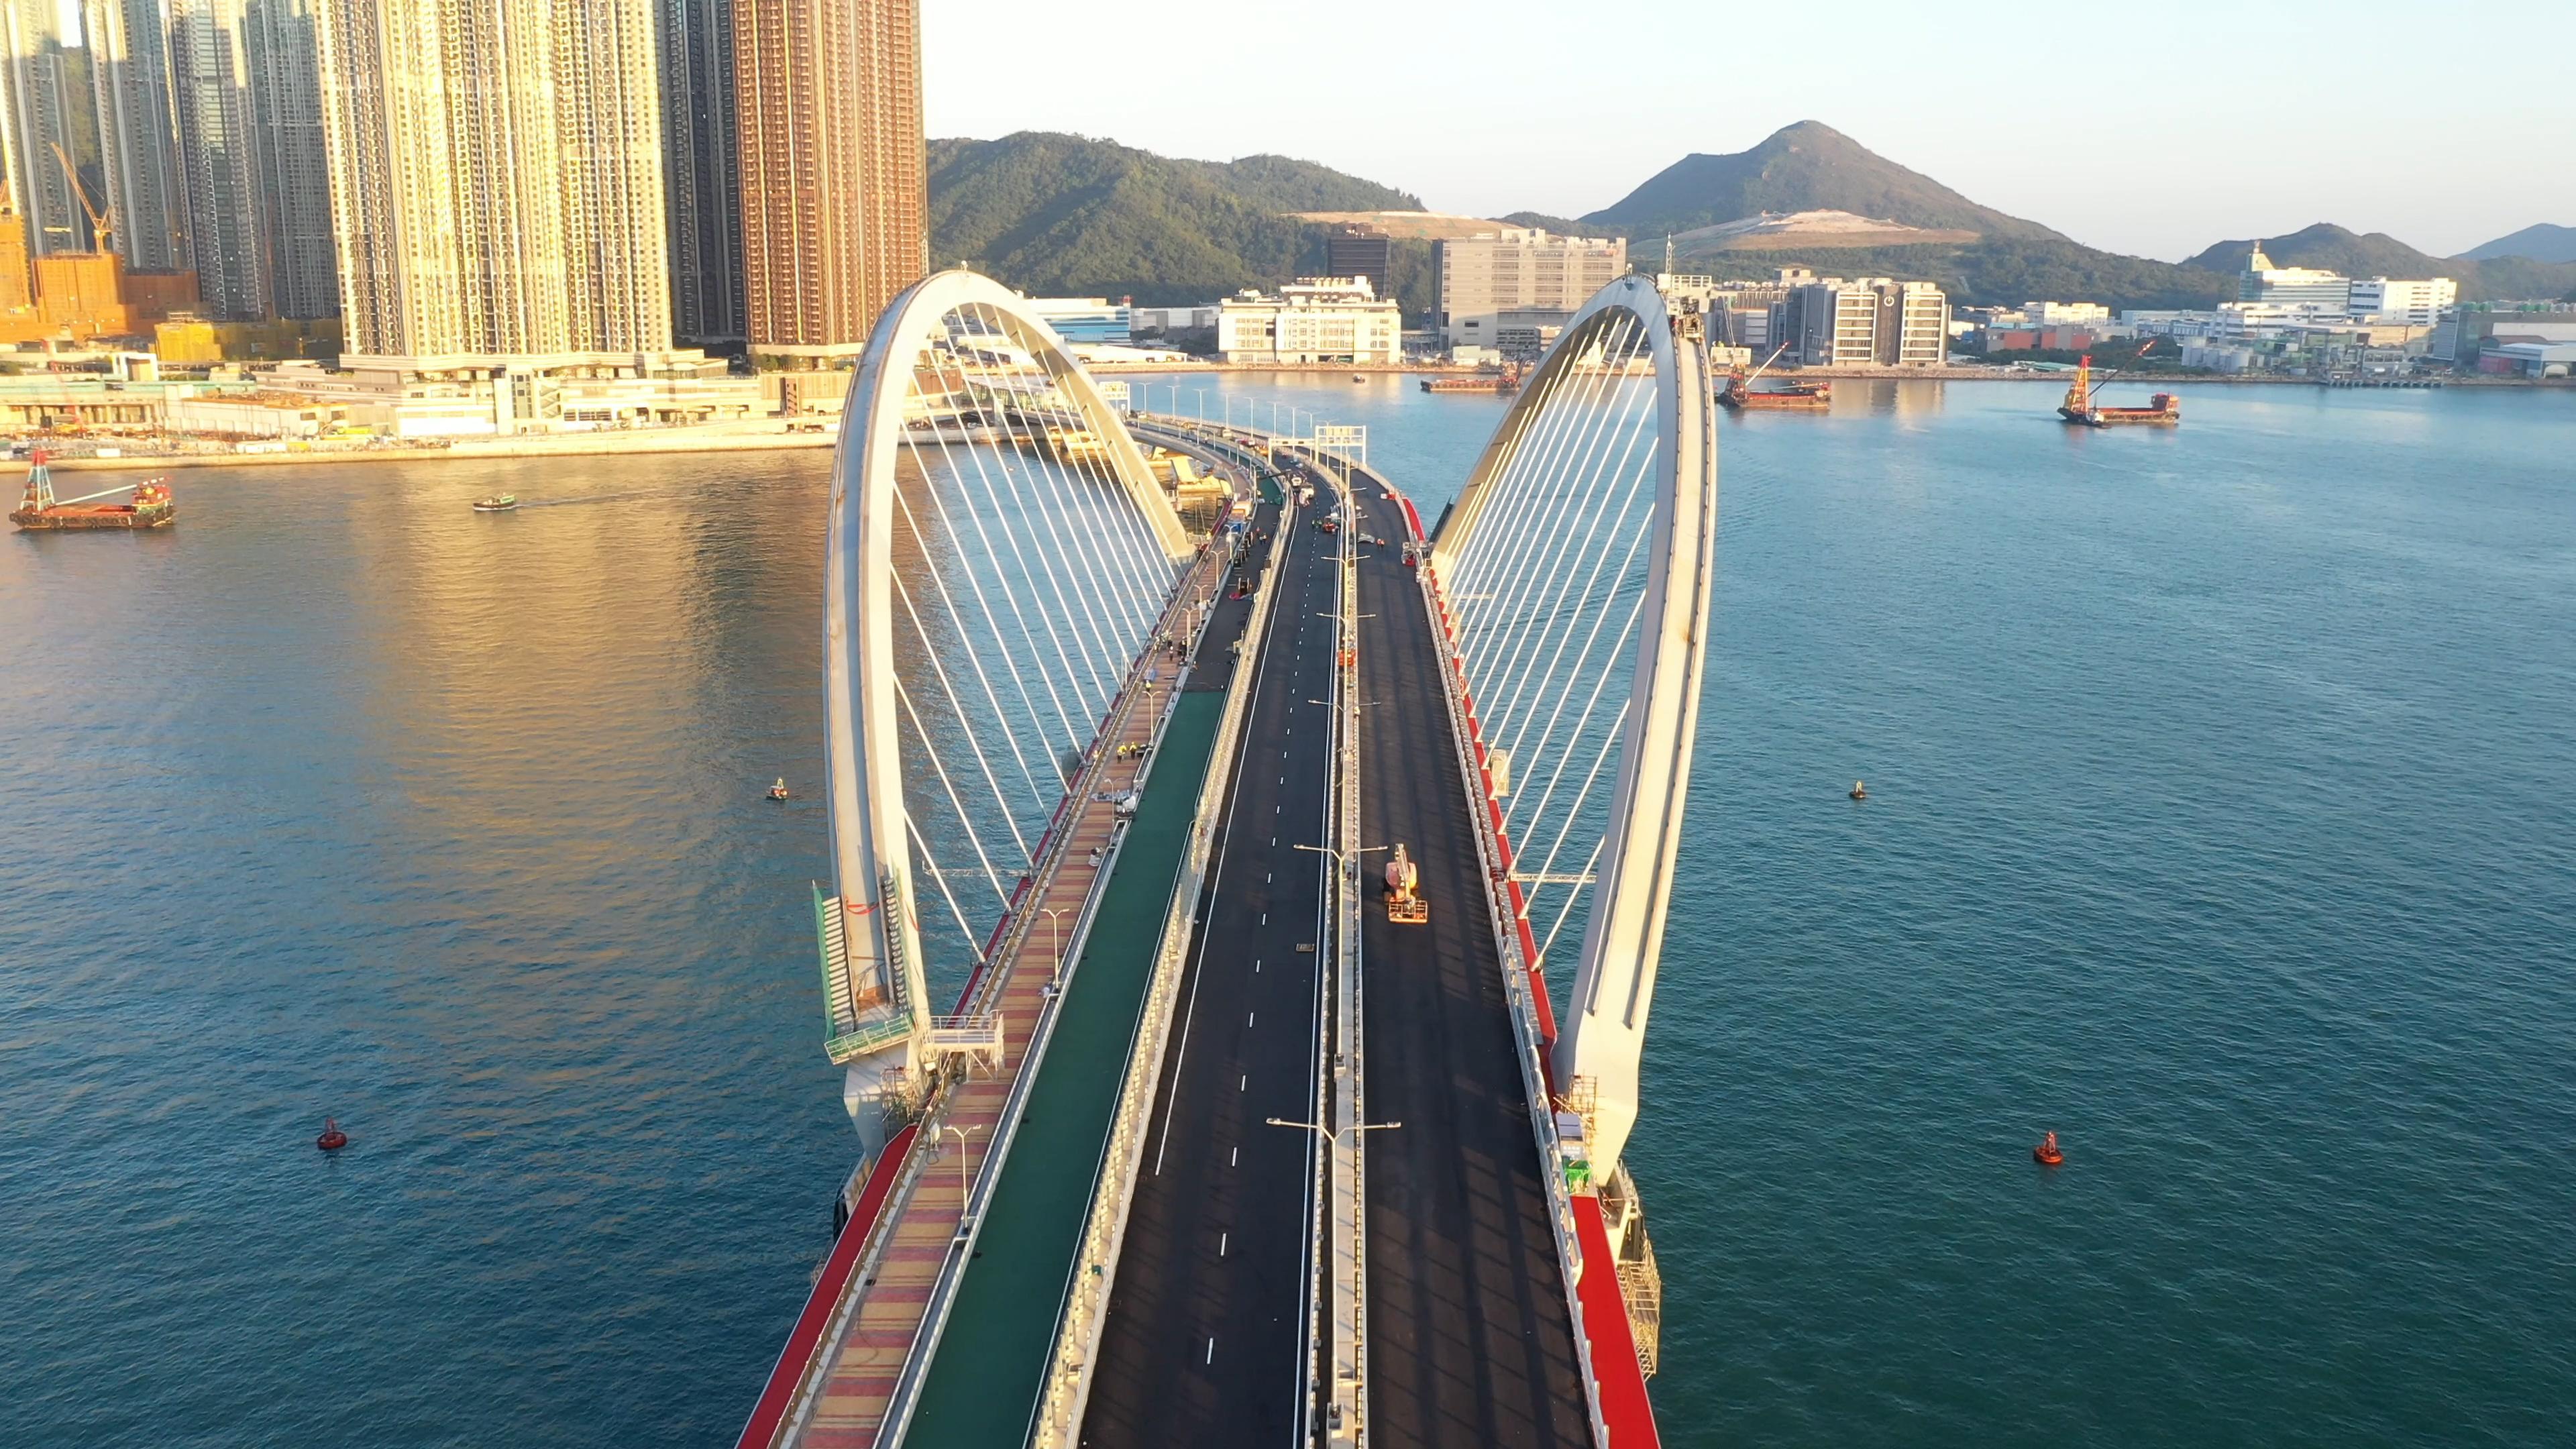 The Tseung Kwan O-Lam Tin Tunnel and the Cross Bay Link, Tseung Kwan O (CBL) will be commissioned on December 11 (Sunday). The CBL will be the first marine viaduct in Hong Kong comprising carriageways, a cycle track and a footway. There will also be viewing platforms on the viaduct for the public to appreciate the beautiful scenery of Junk Bay and the Eastern Channel.